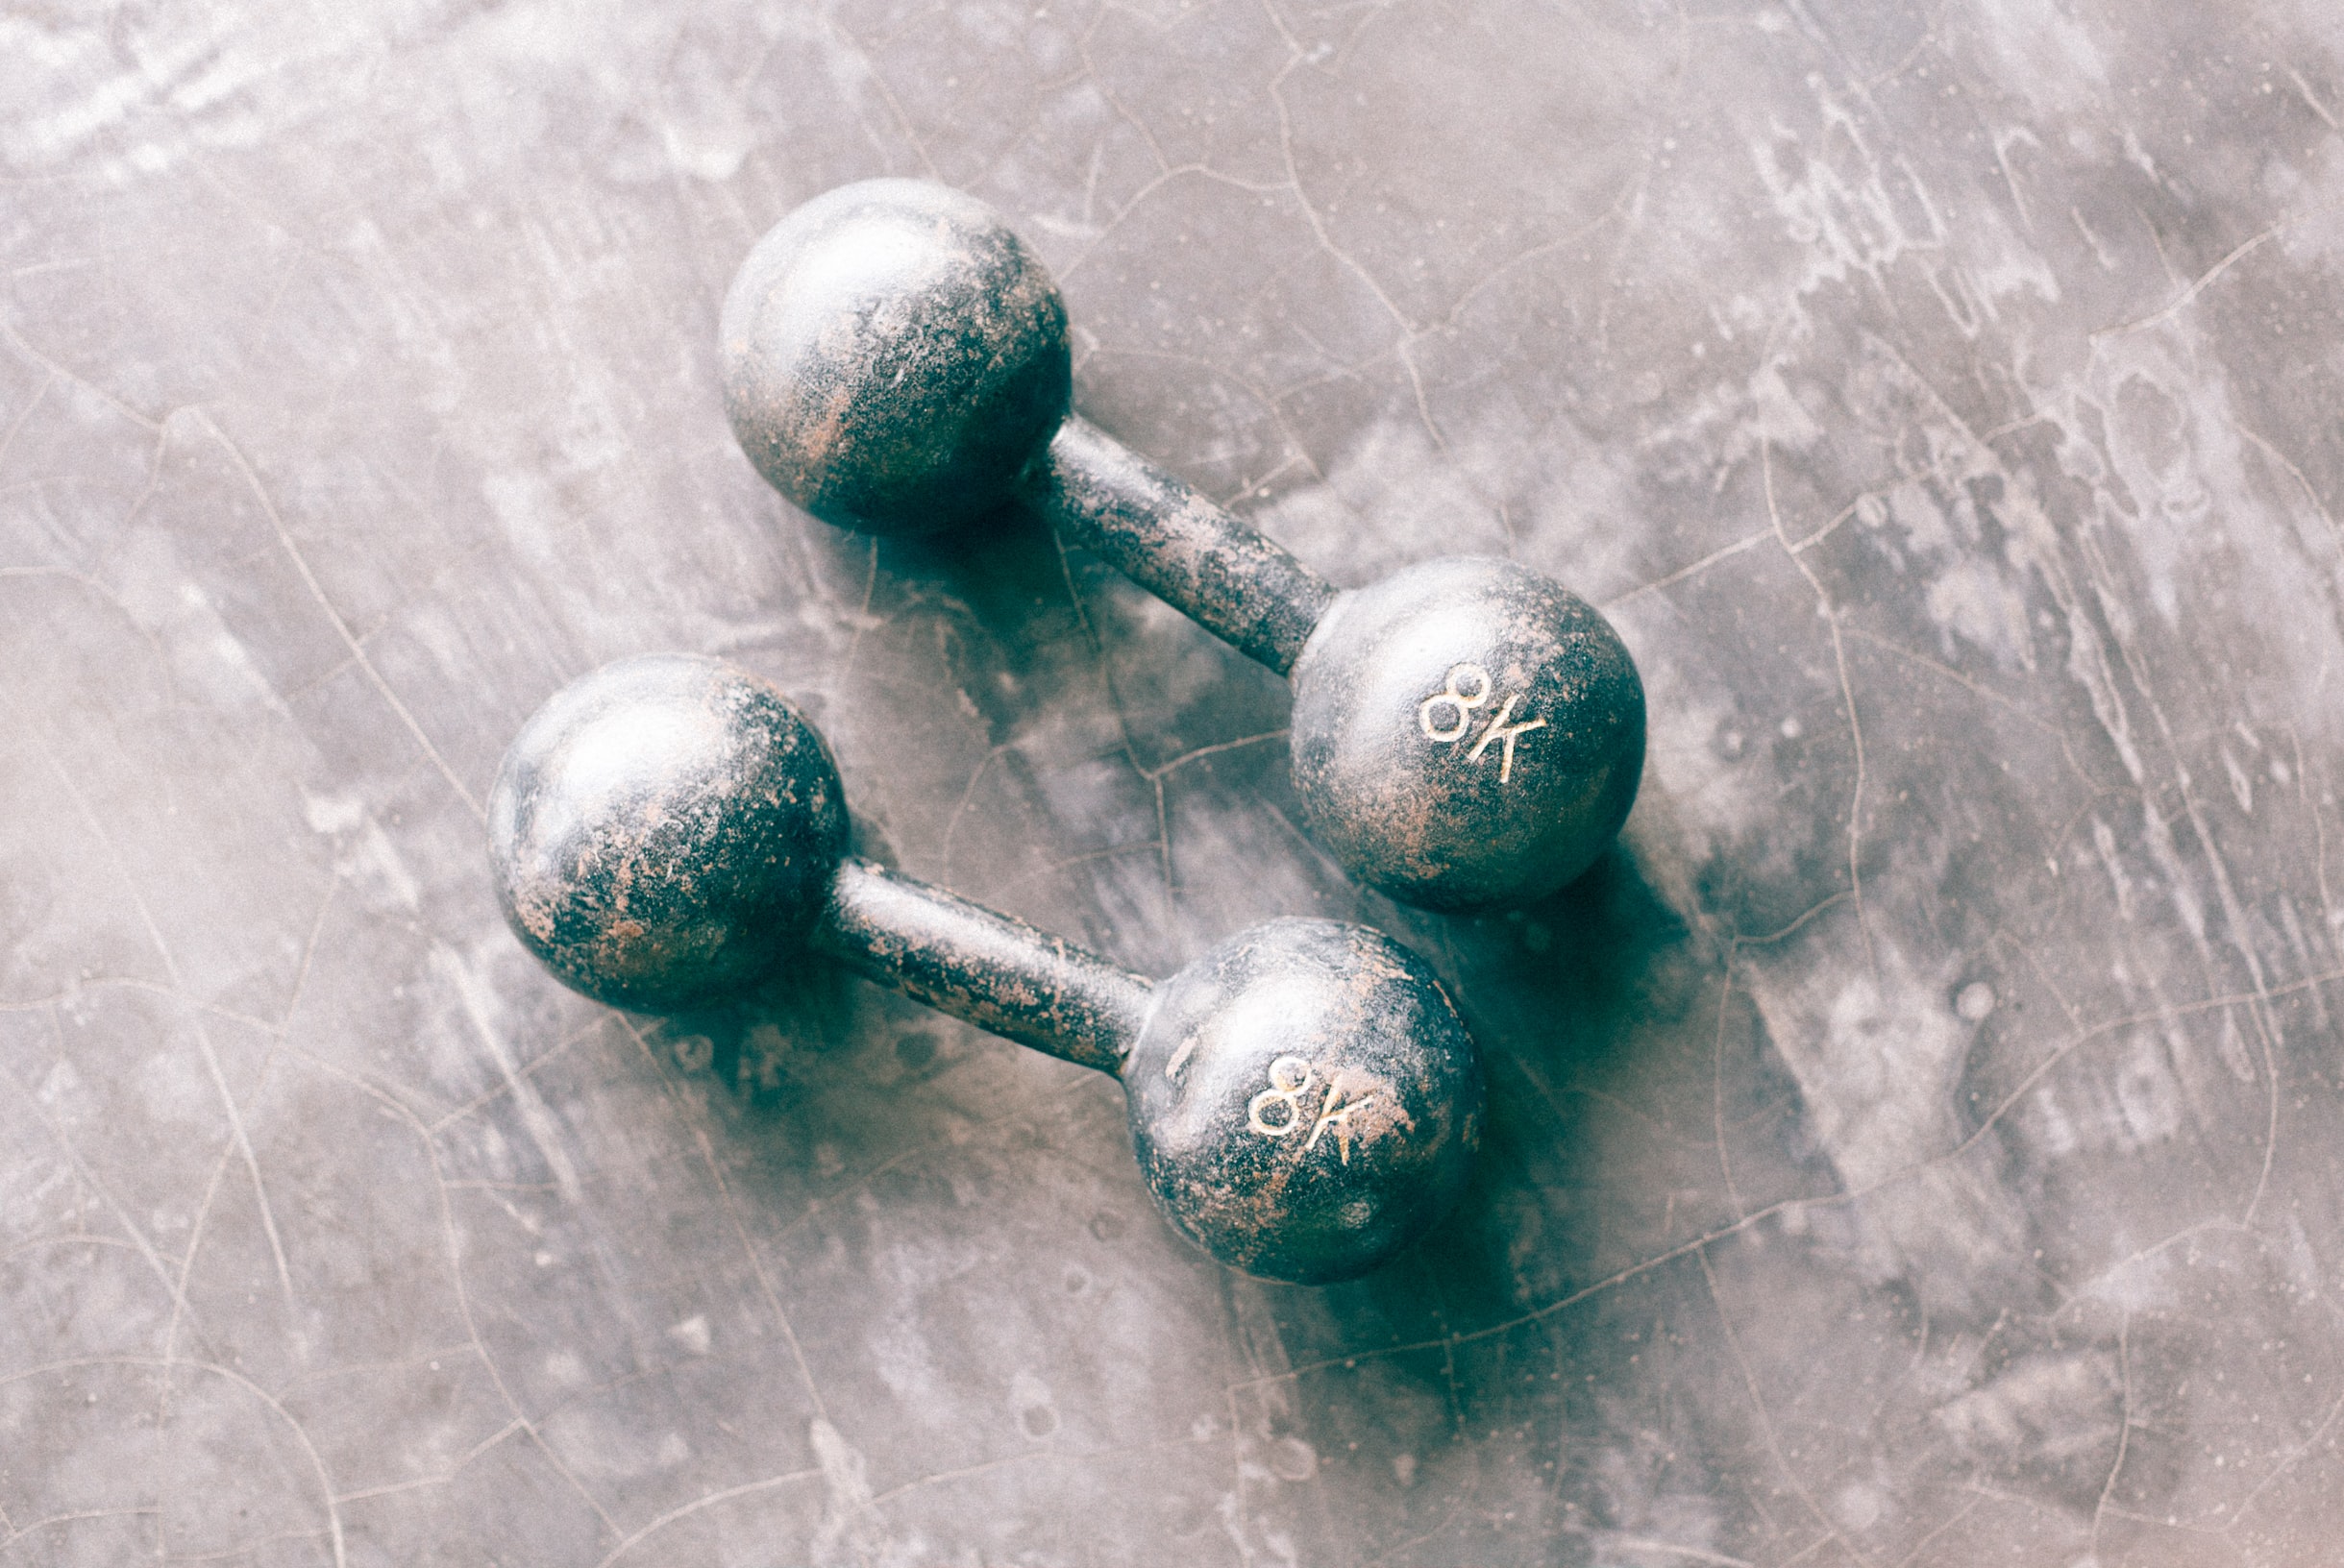 Everything you need to stock up on for winter: Exercise gear like dumbbells